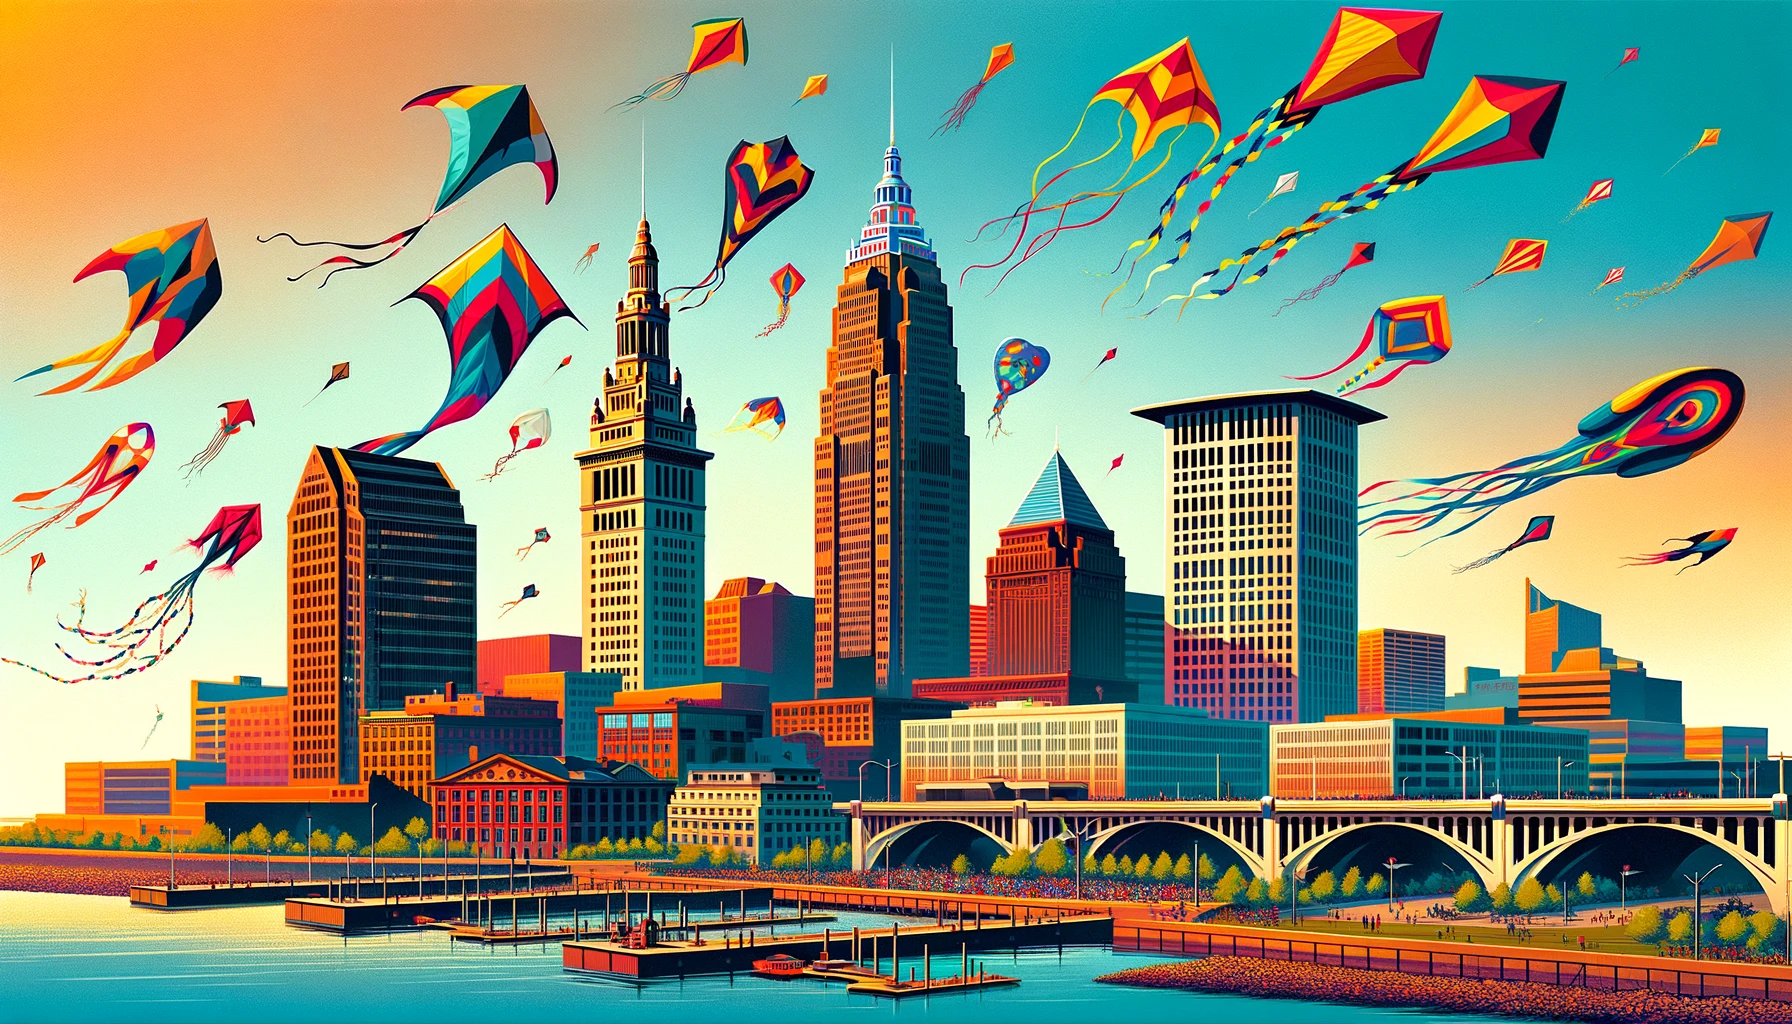 A stylistic picture of the cleveland skyline with kites